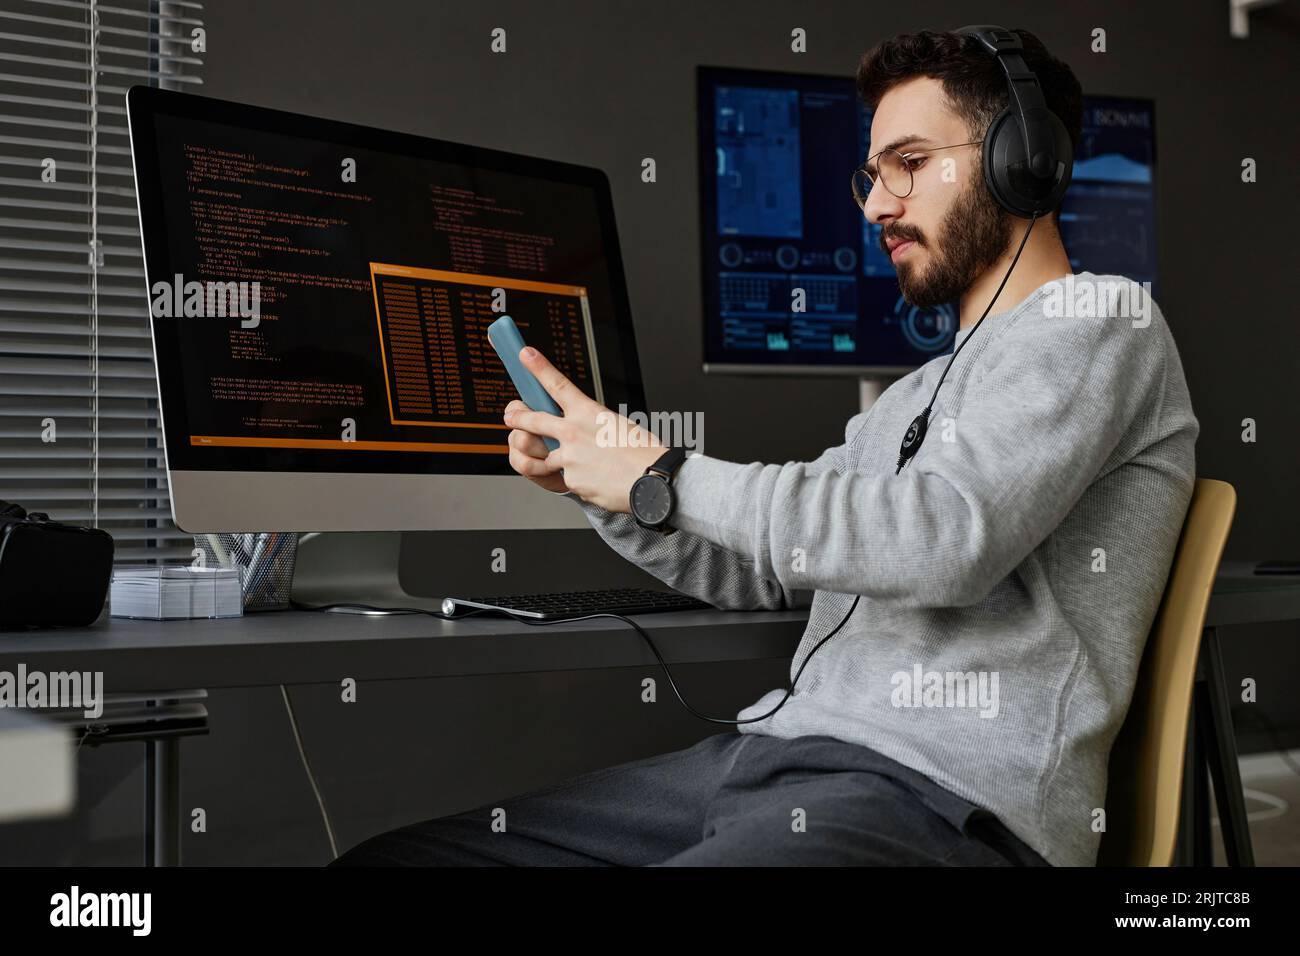 Young computer programmer using smart phone at desk Stock Photo